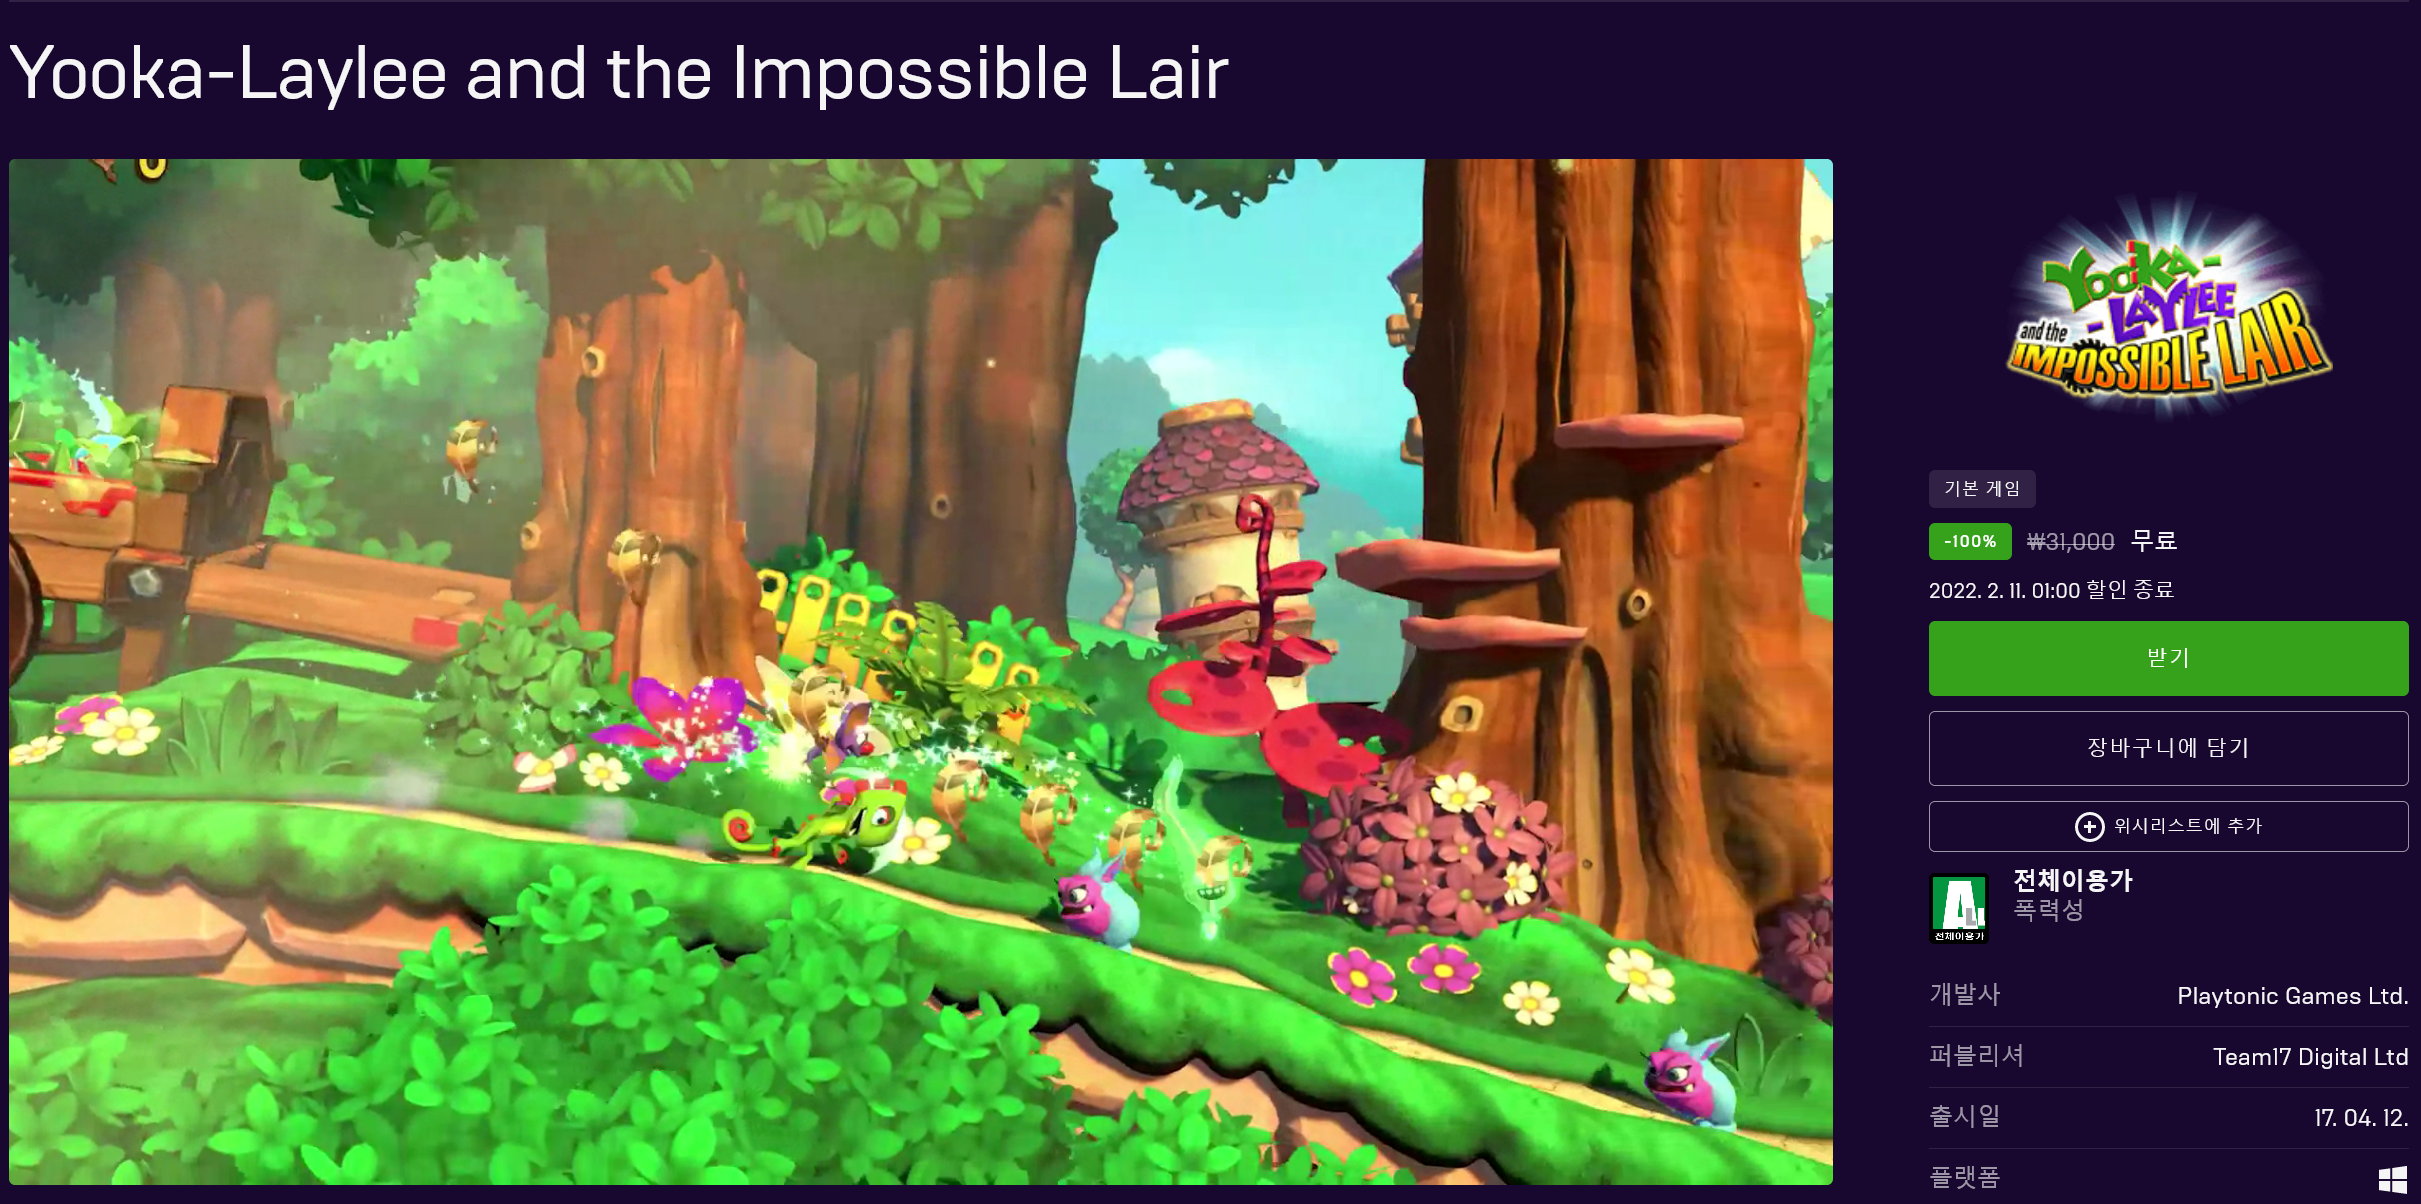 Screenshot 2022-02-04 at 01-31-10 Yooka-Laylee and the Impossible Lair 오늘 다운로드 및 구매 - Epic Games Store.png